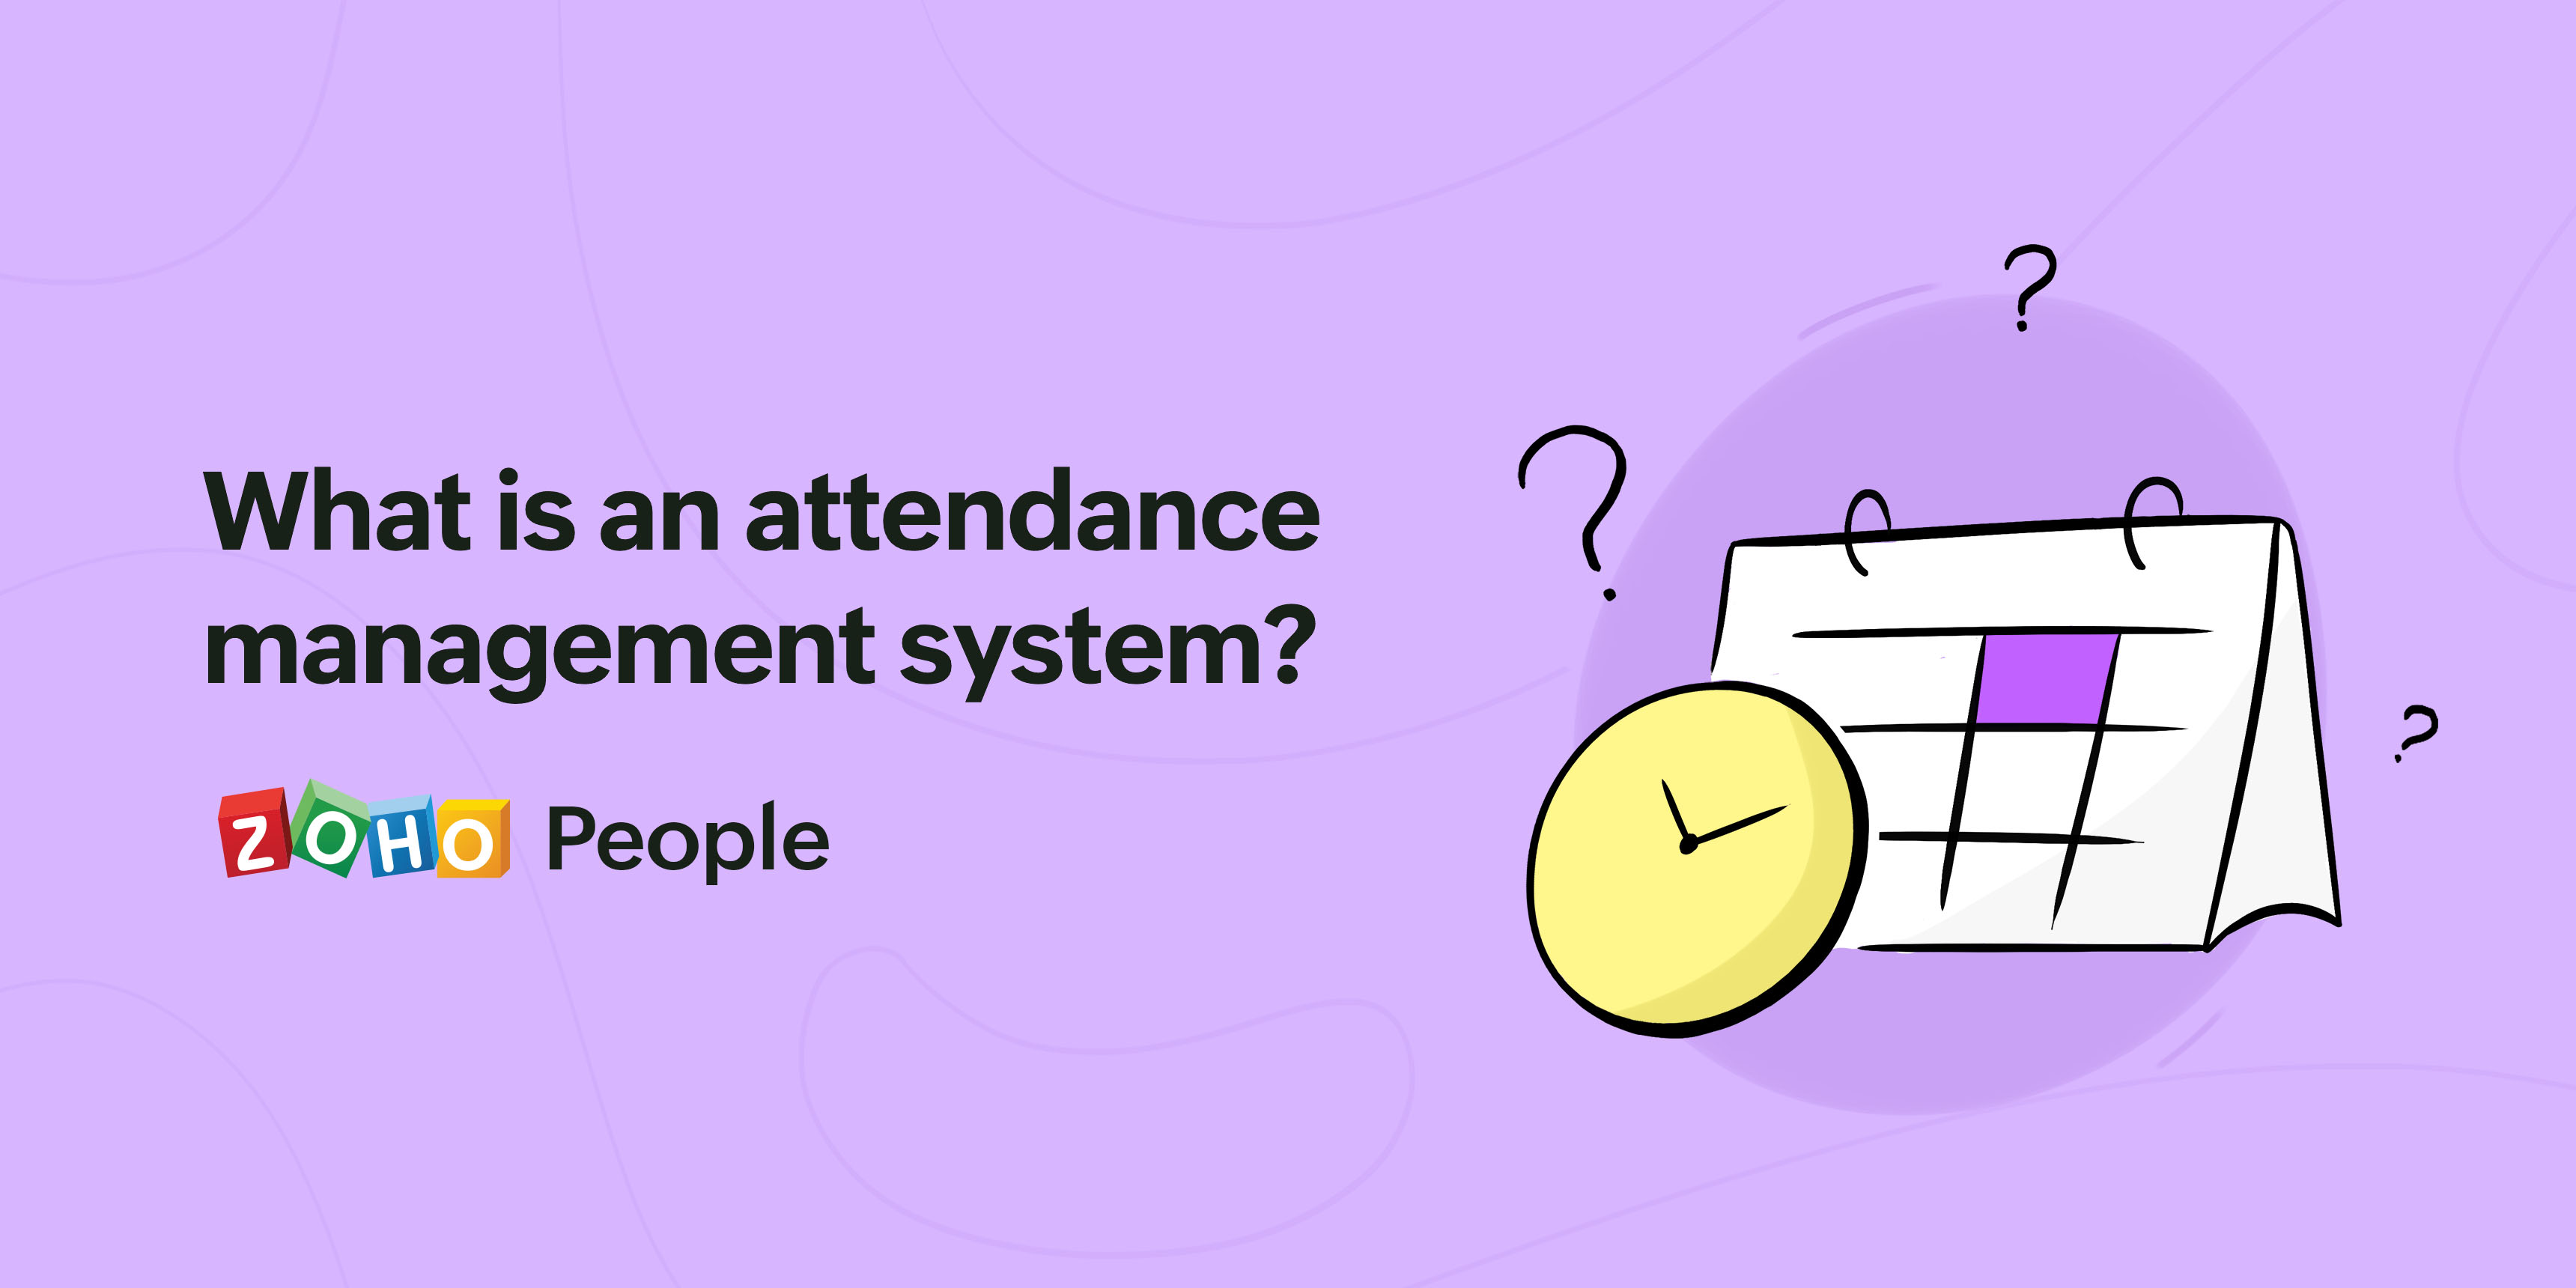 What is an attendance management system?